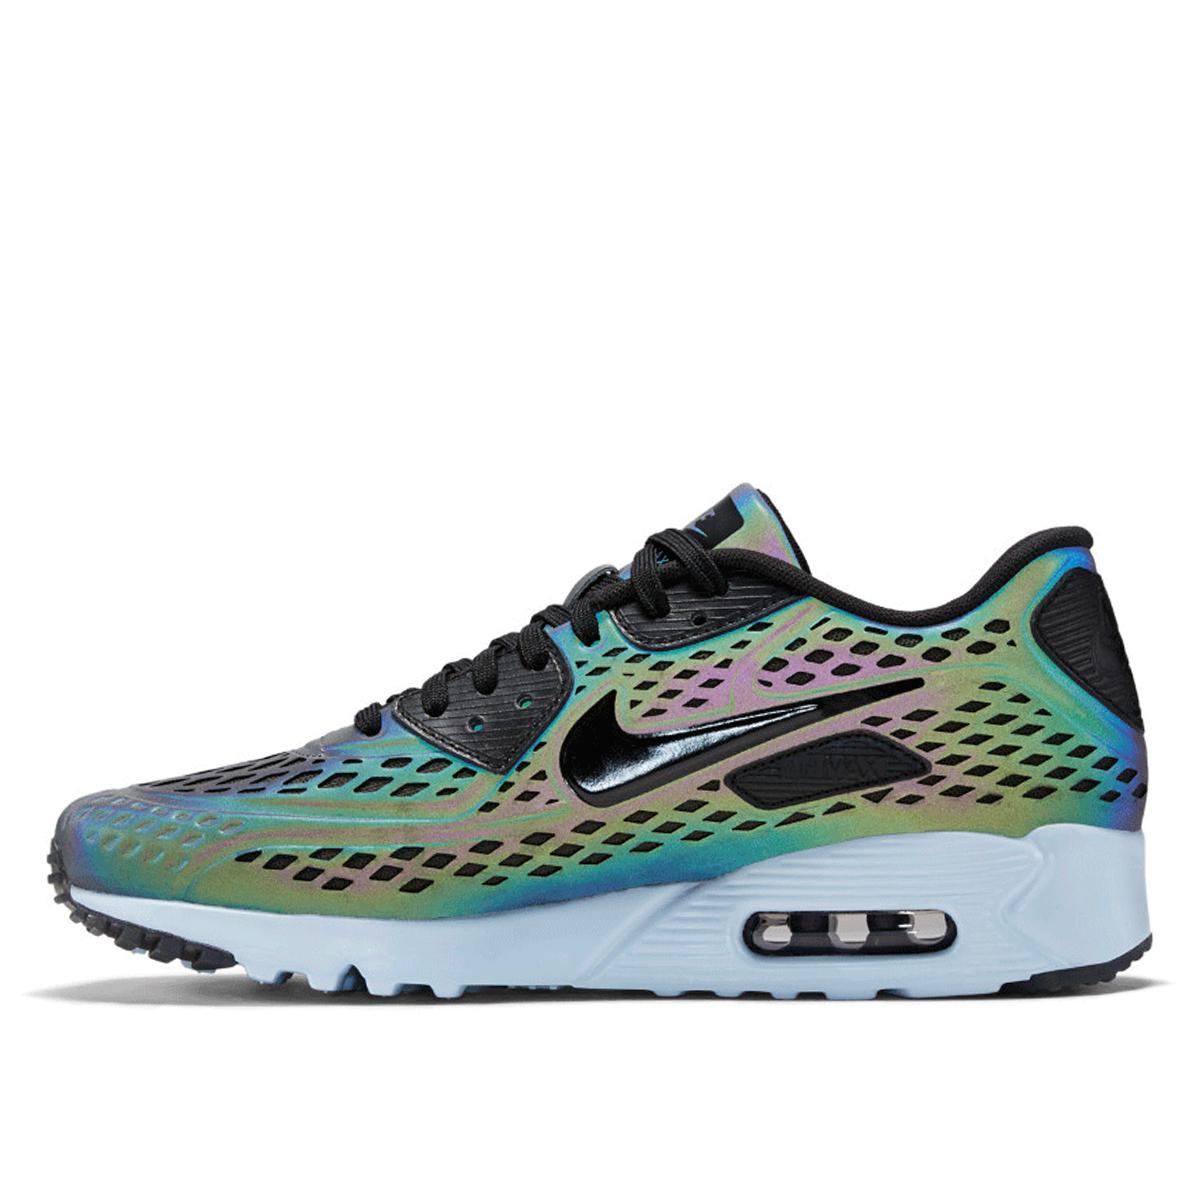 Nike Air Max 90 Ultra Moire 'Iridescent 